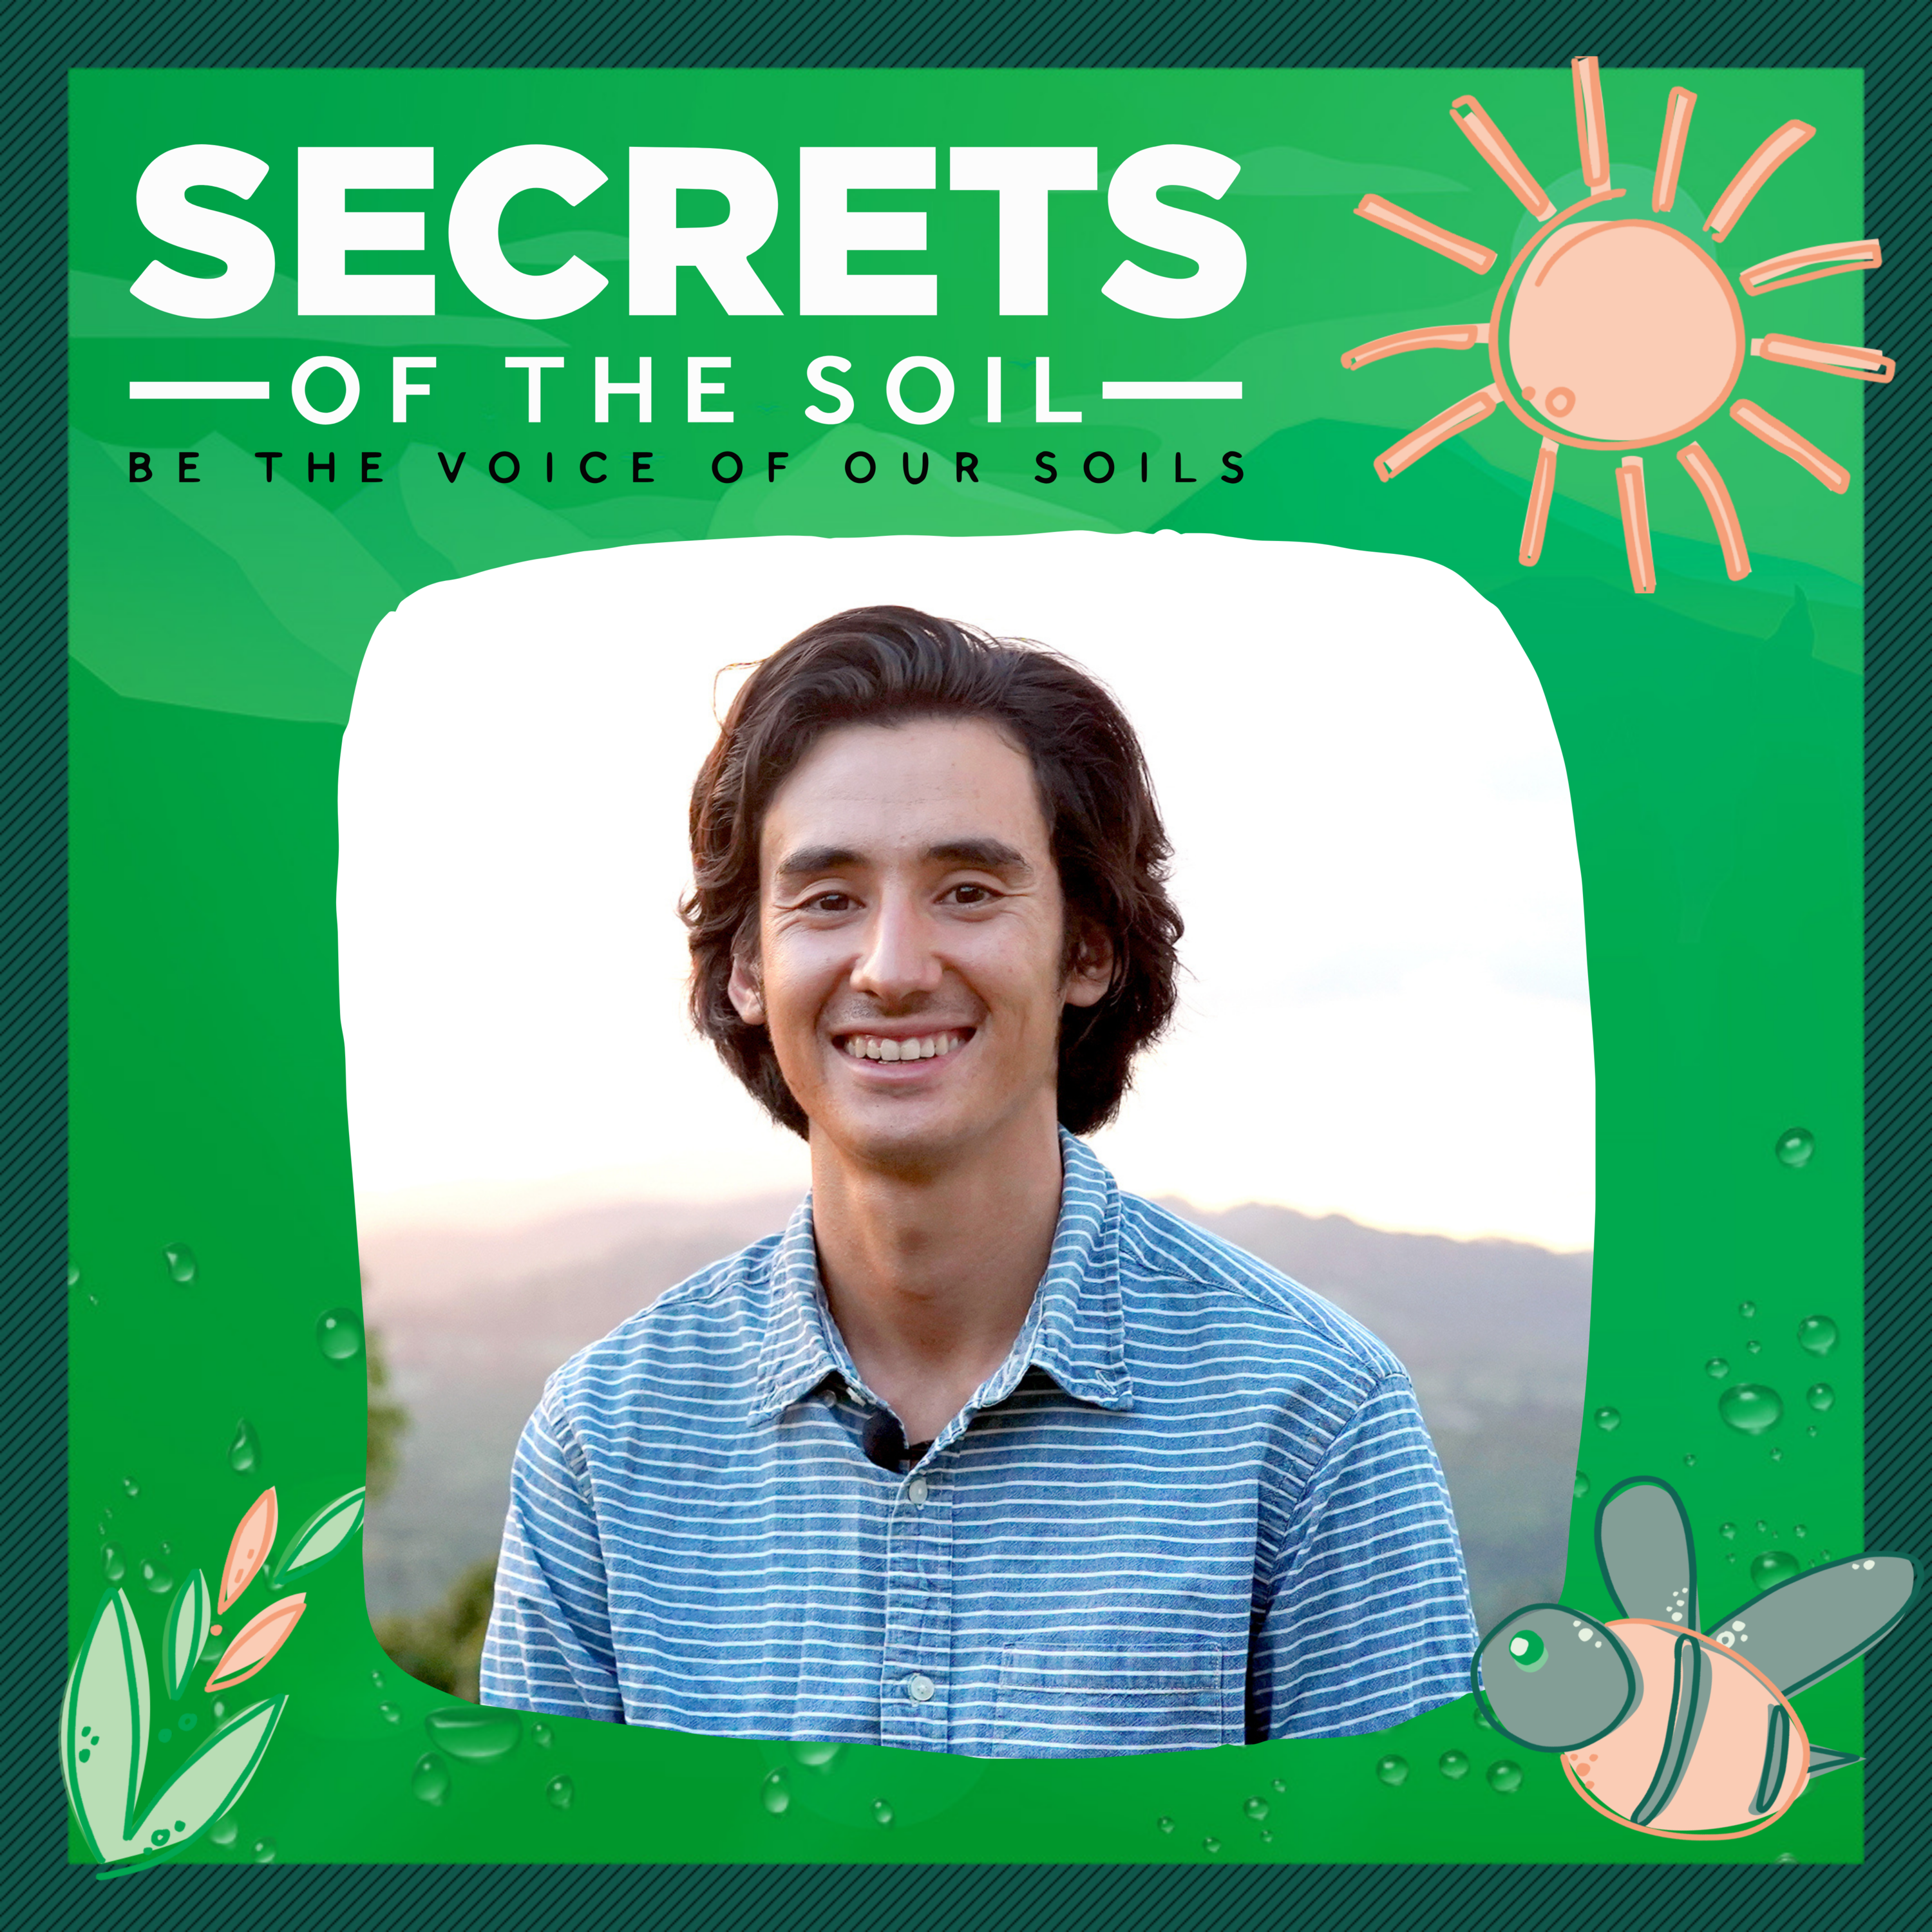 26: Making Soil Sexy - Feed The Soils, Feed The World with Peter Critch